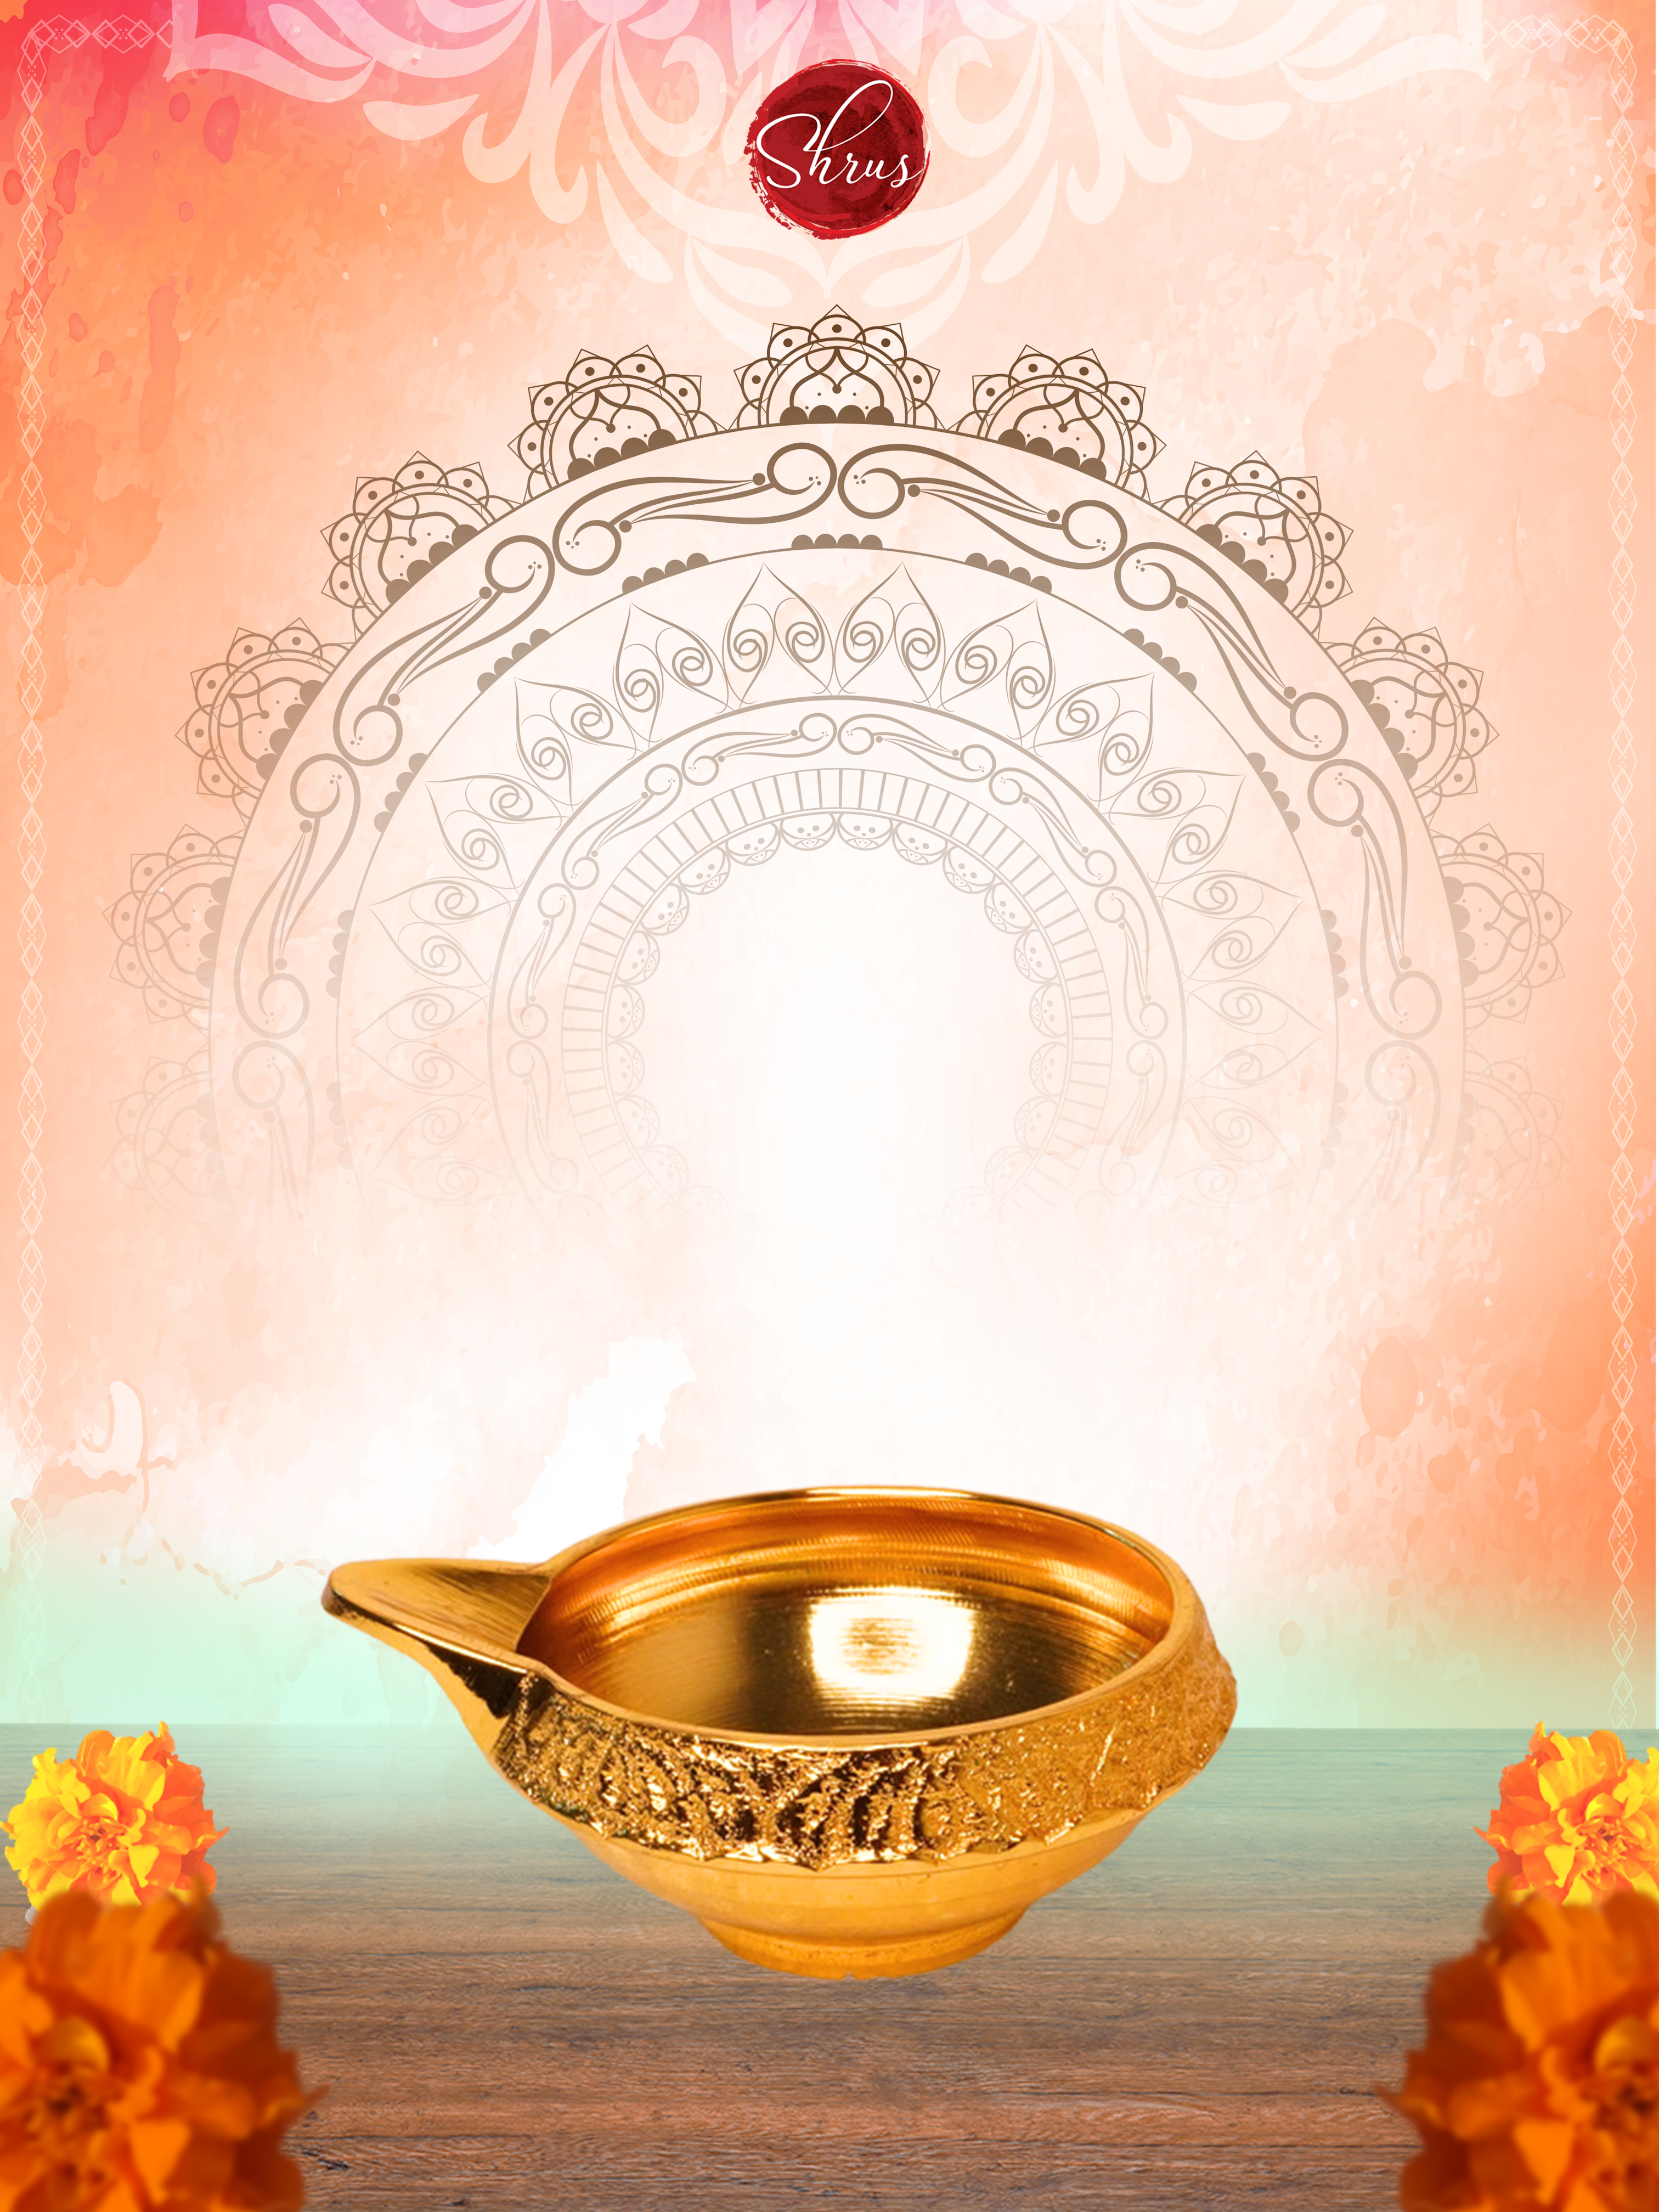 24 KT Gold Plated Small Kubera Deepam / Oil Lamp/ Diyas for Puja room/ gifting and Home Decor in Dual Tone Finish (Pack of Six) - Shop on ShrusEternity.com